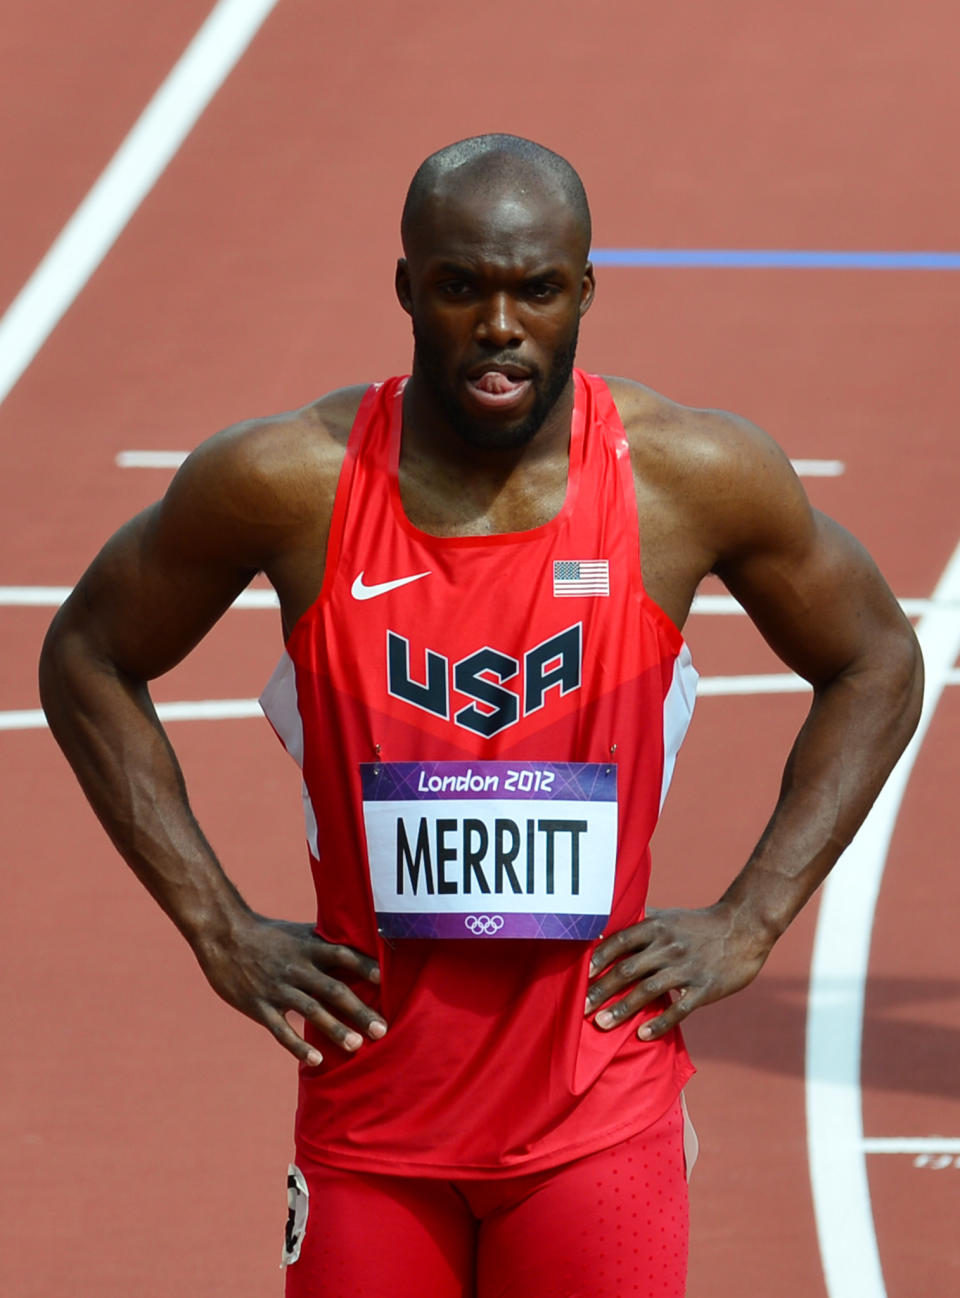 US' Lashawn Merritt looks dejected after pulling up from the men's 400m heats at the athletics event during the London 2012 Olympic Games on August 4, 2012 in London. AFP PHOTO / GABRIEL BOUYSGABRIEL BOUYS/AFP/GettyImages